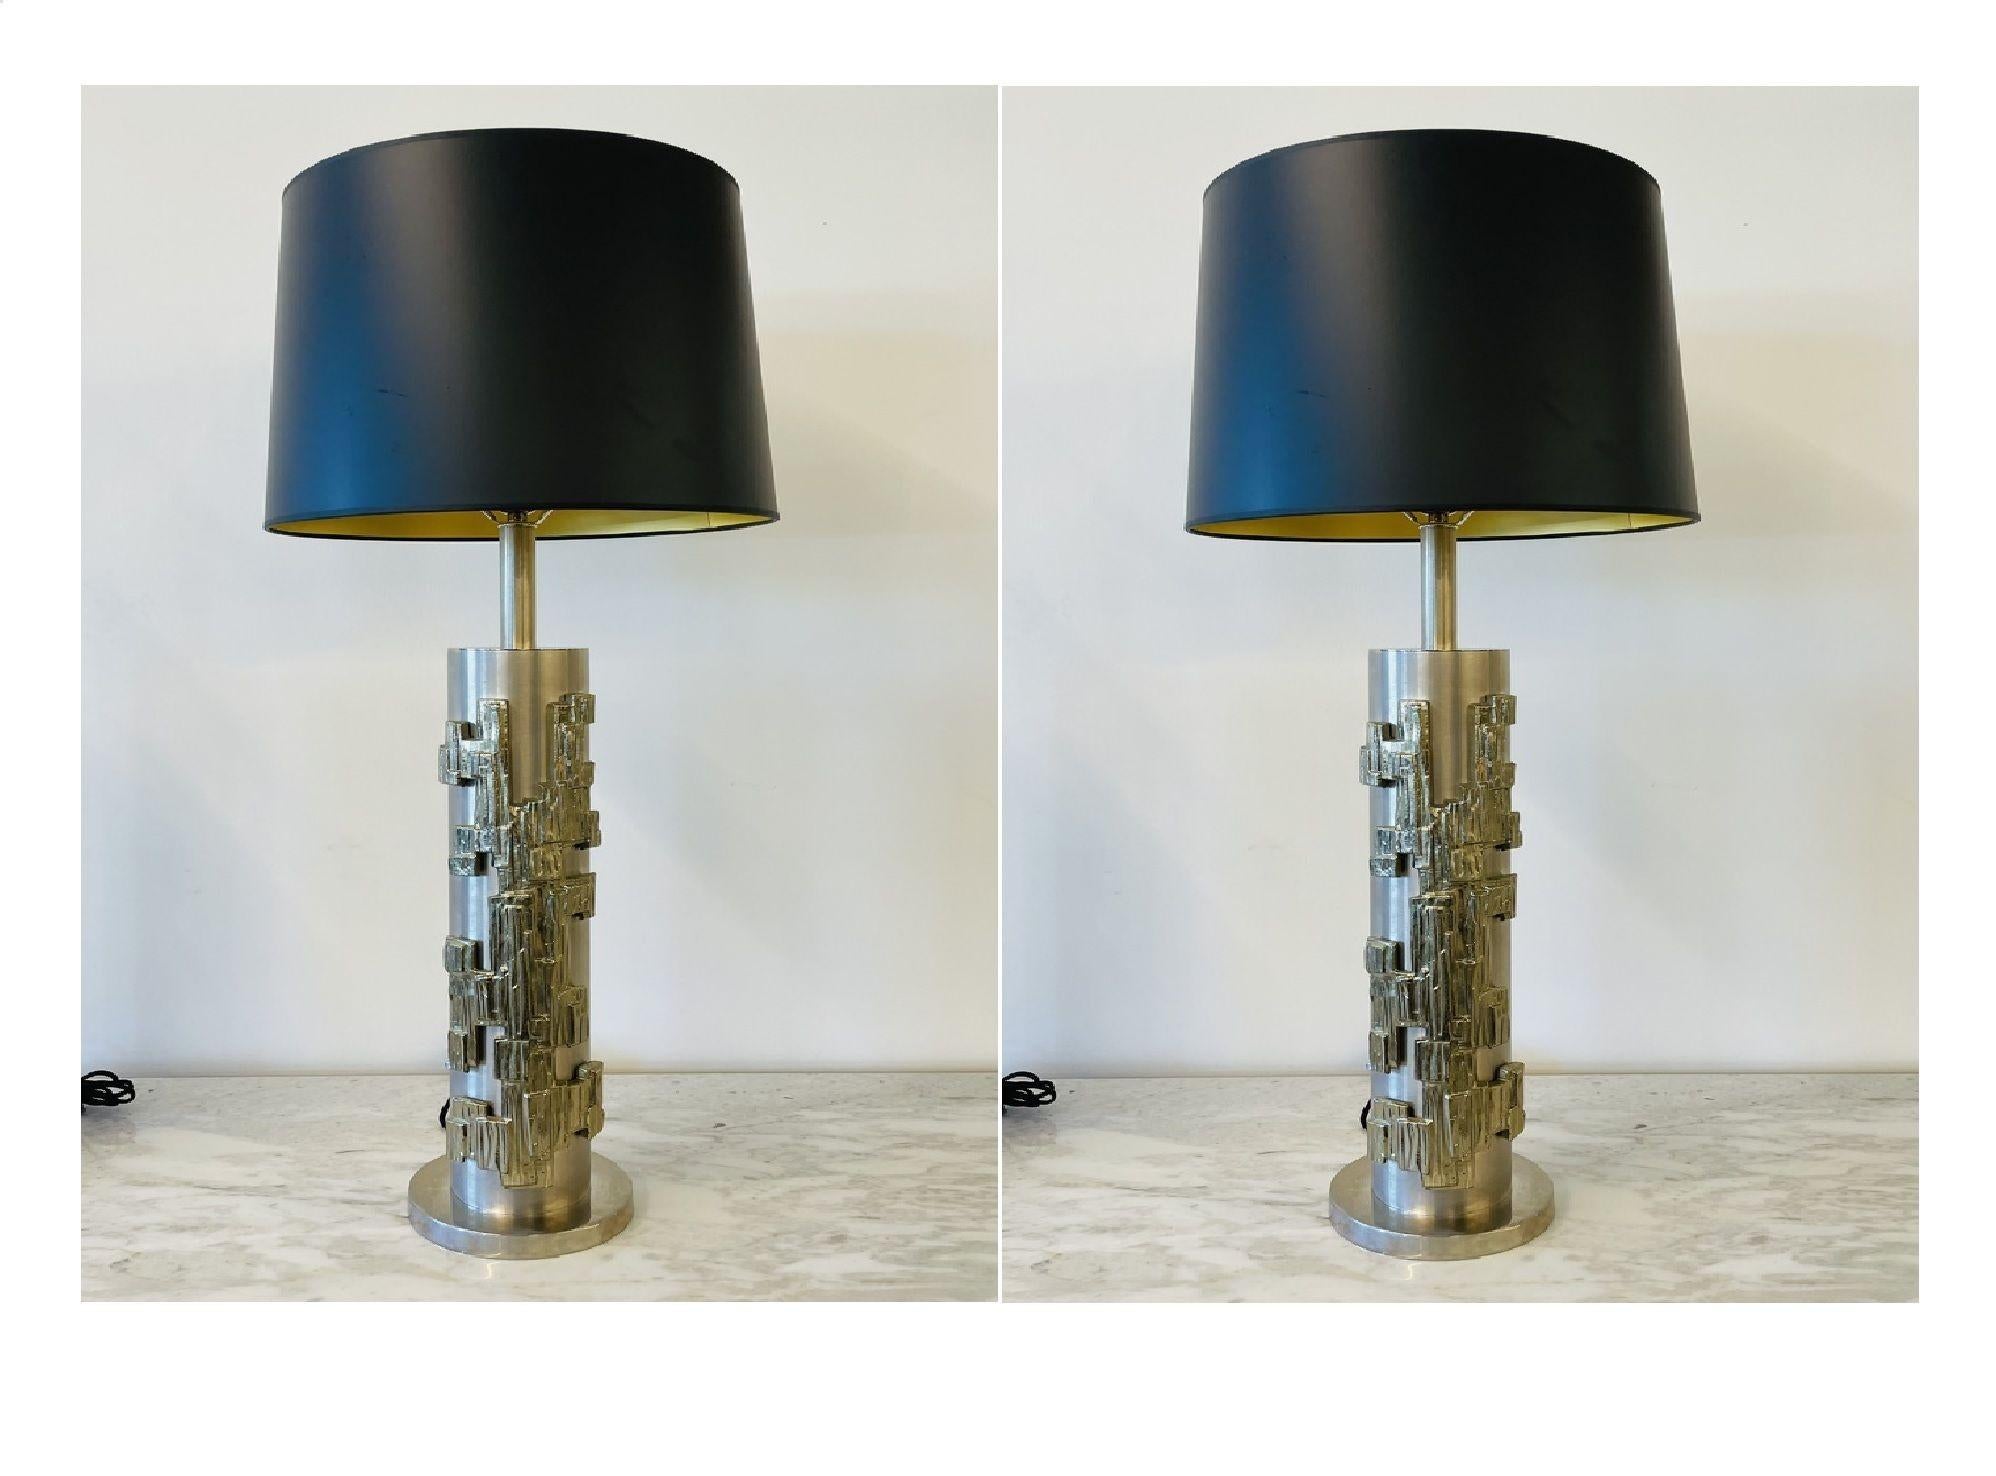 A pair of modernist table lamps, Brushed Nickel and Sculptural Metal, circa 1970s.
 
Brushed Nickel and Gilt Metal Brutalist, Geometrically Inspired Lamps, recently re-wired; shades not included. 
 
36 H x 6 diameter.
 
1 x e26 standard socket